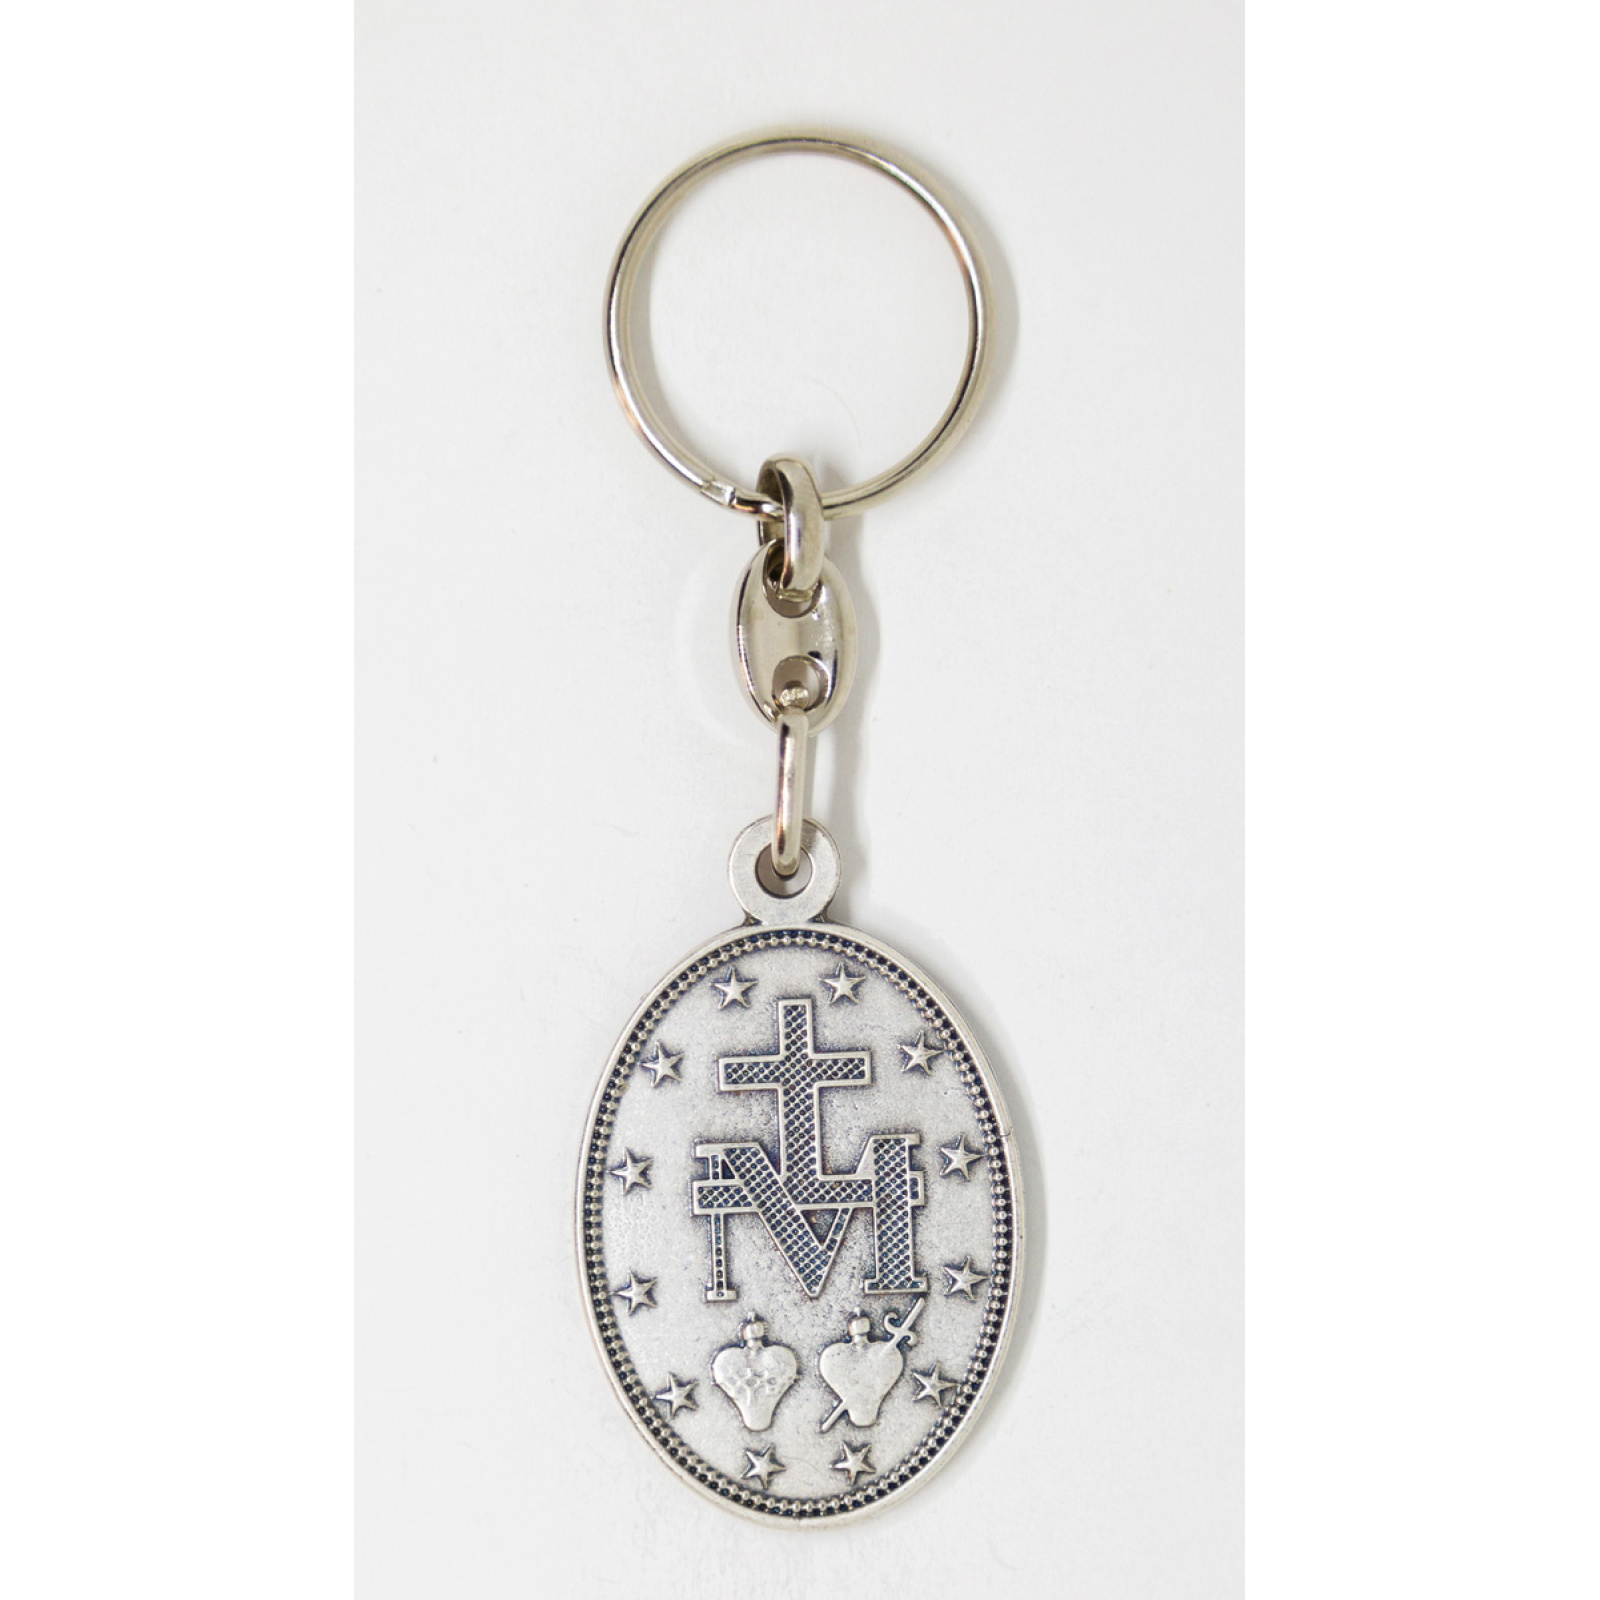 Our Lady of Miraculous medal keychain